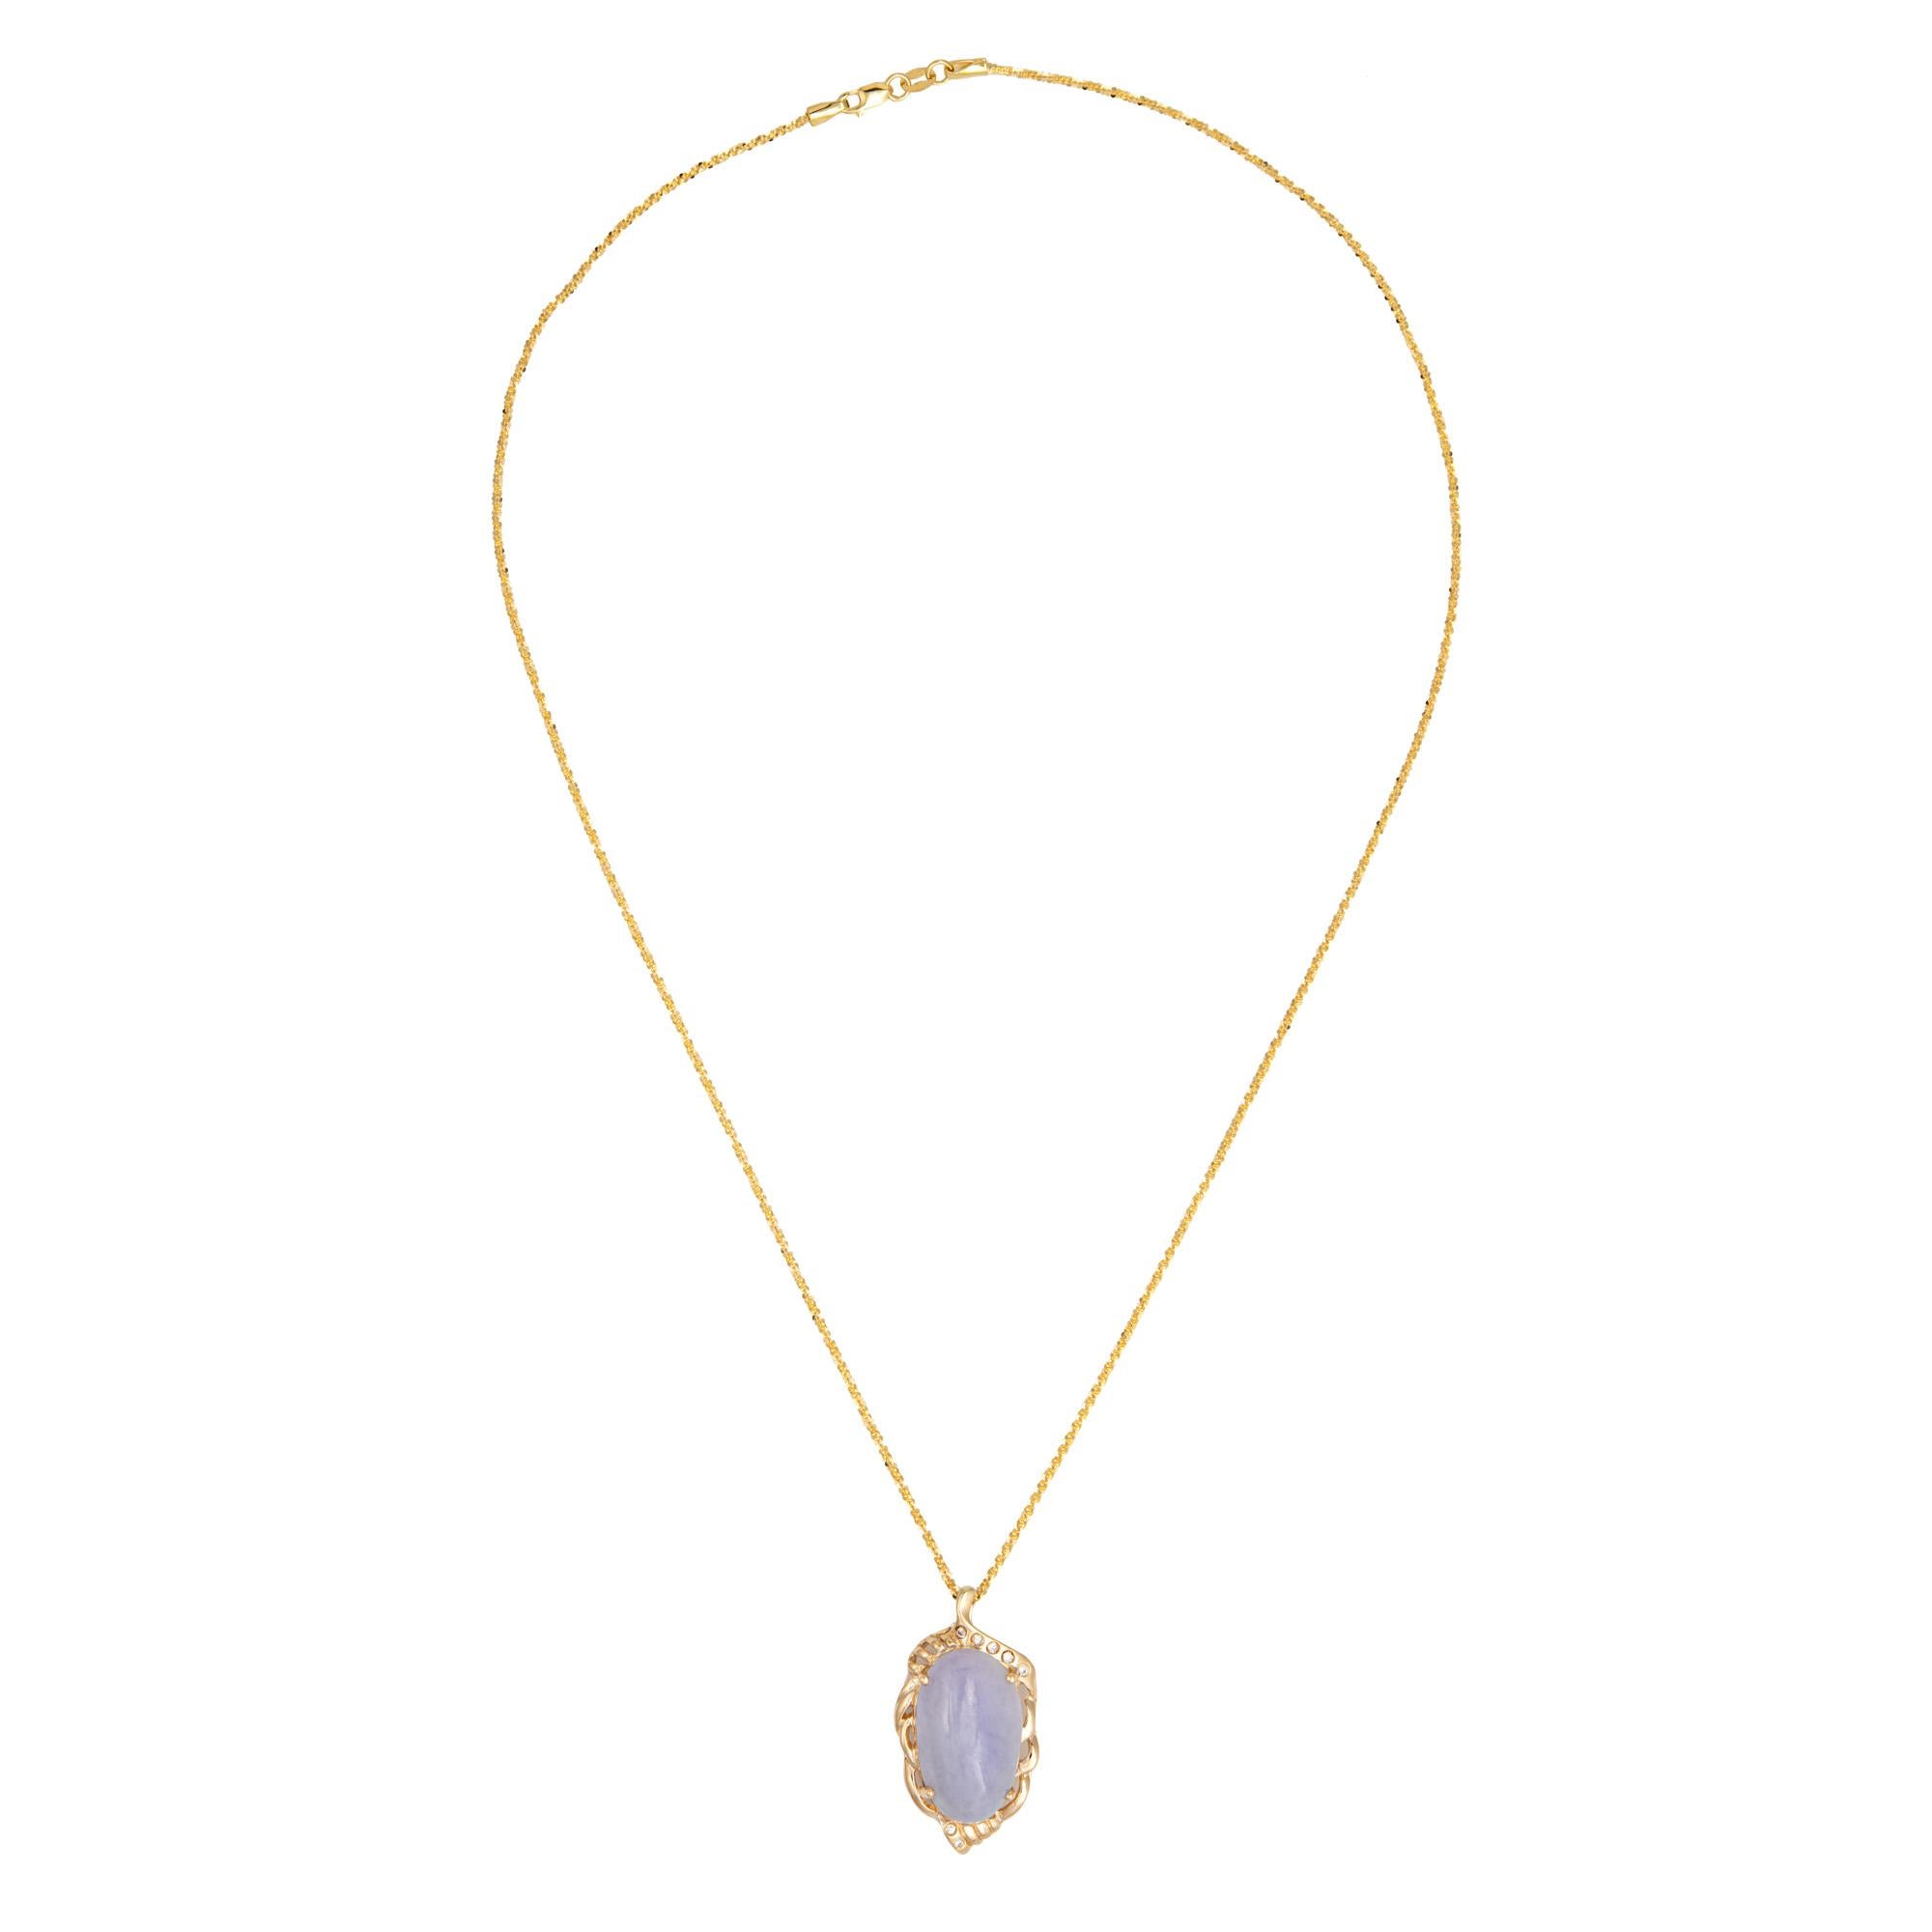 Stylish and finely detailed lavender jade & diamond necklace crafted in 14 karat yellow gold (circa 1970s to 1980s).

Cabochon cut lavender jade measures 20mm x 12mm (estimated at 13350 carats), accented with an estimated 0.03 carats of diamonds